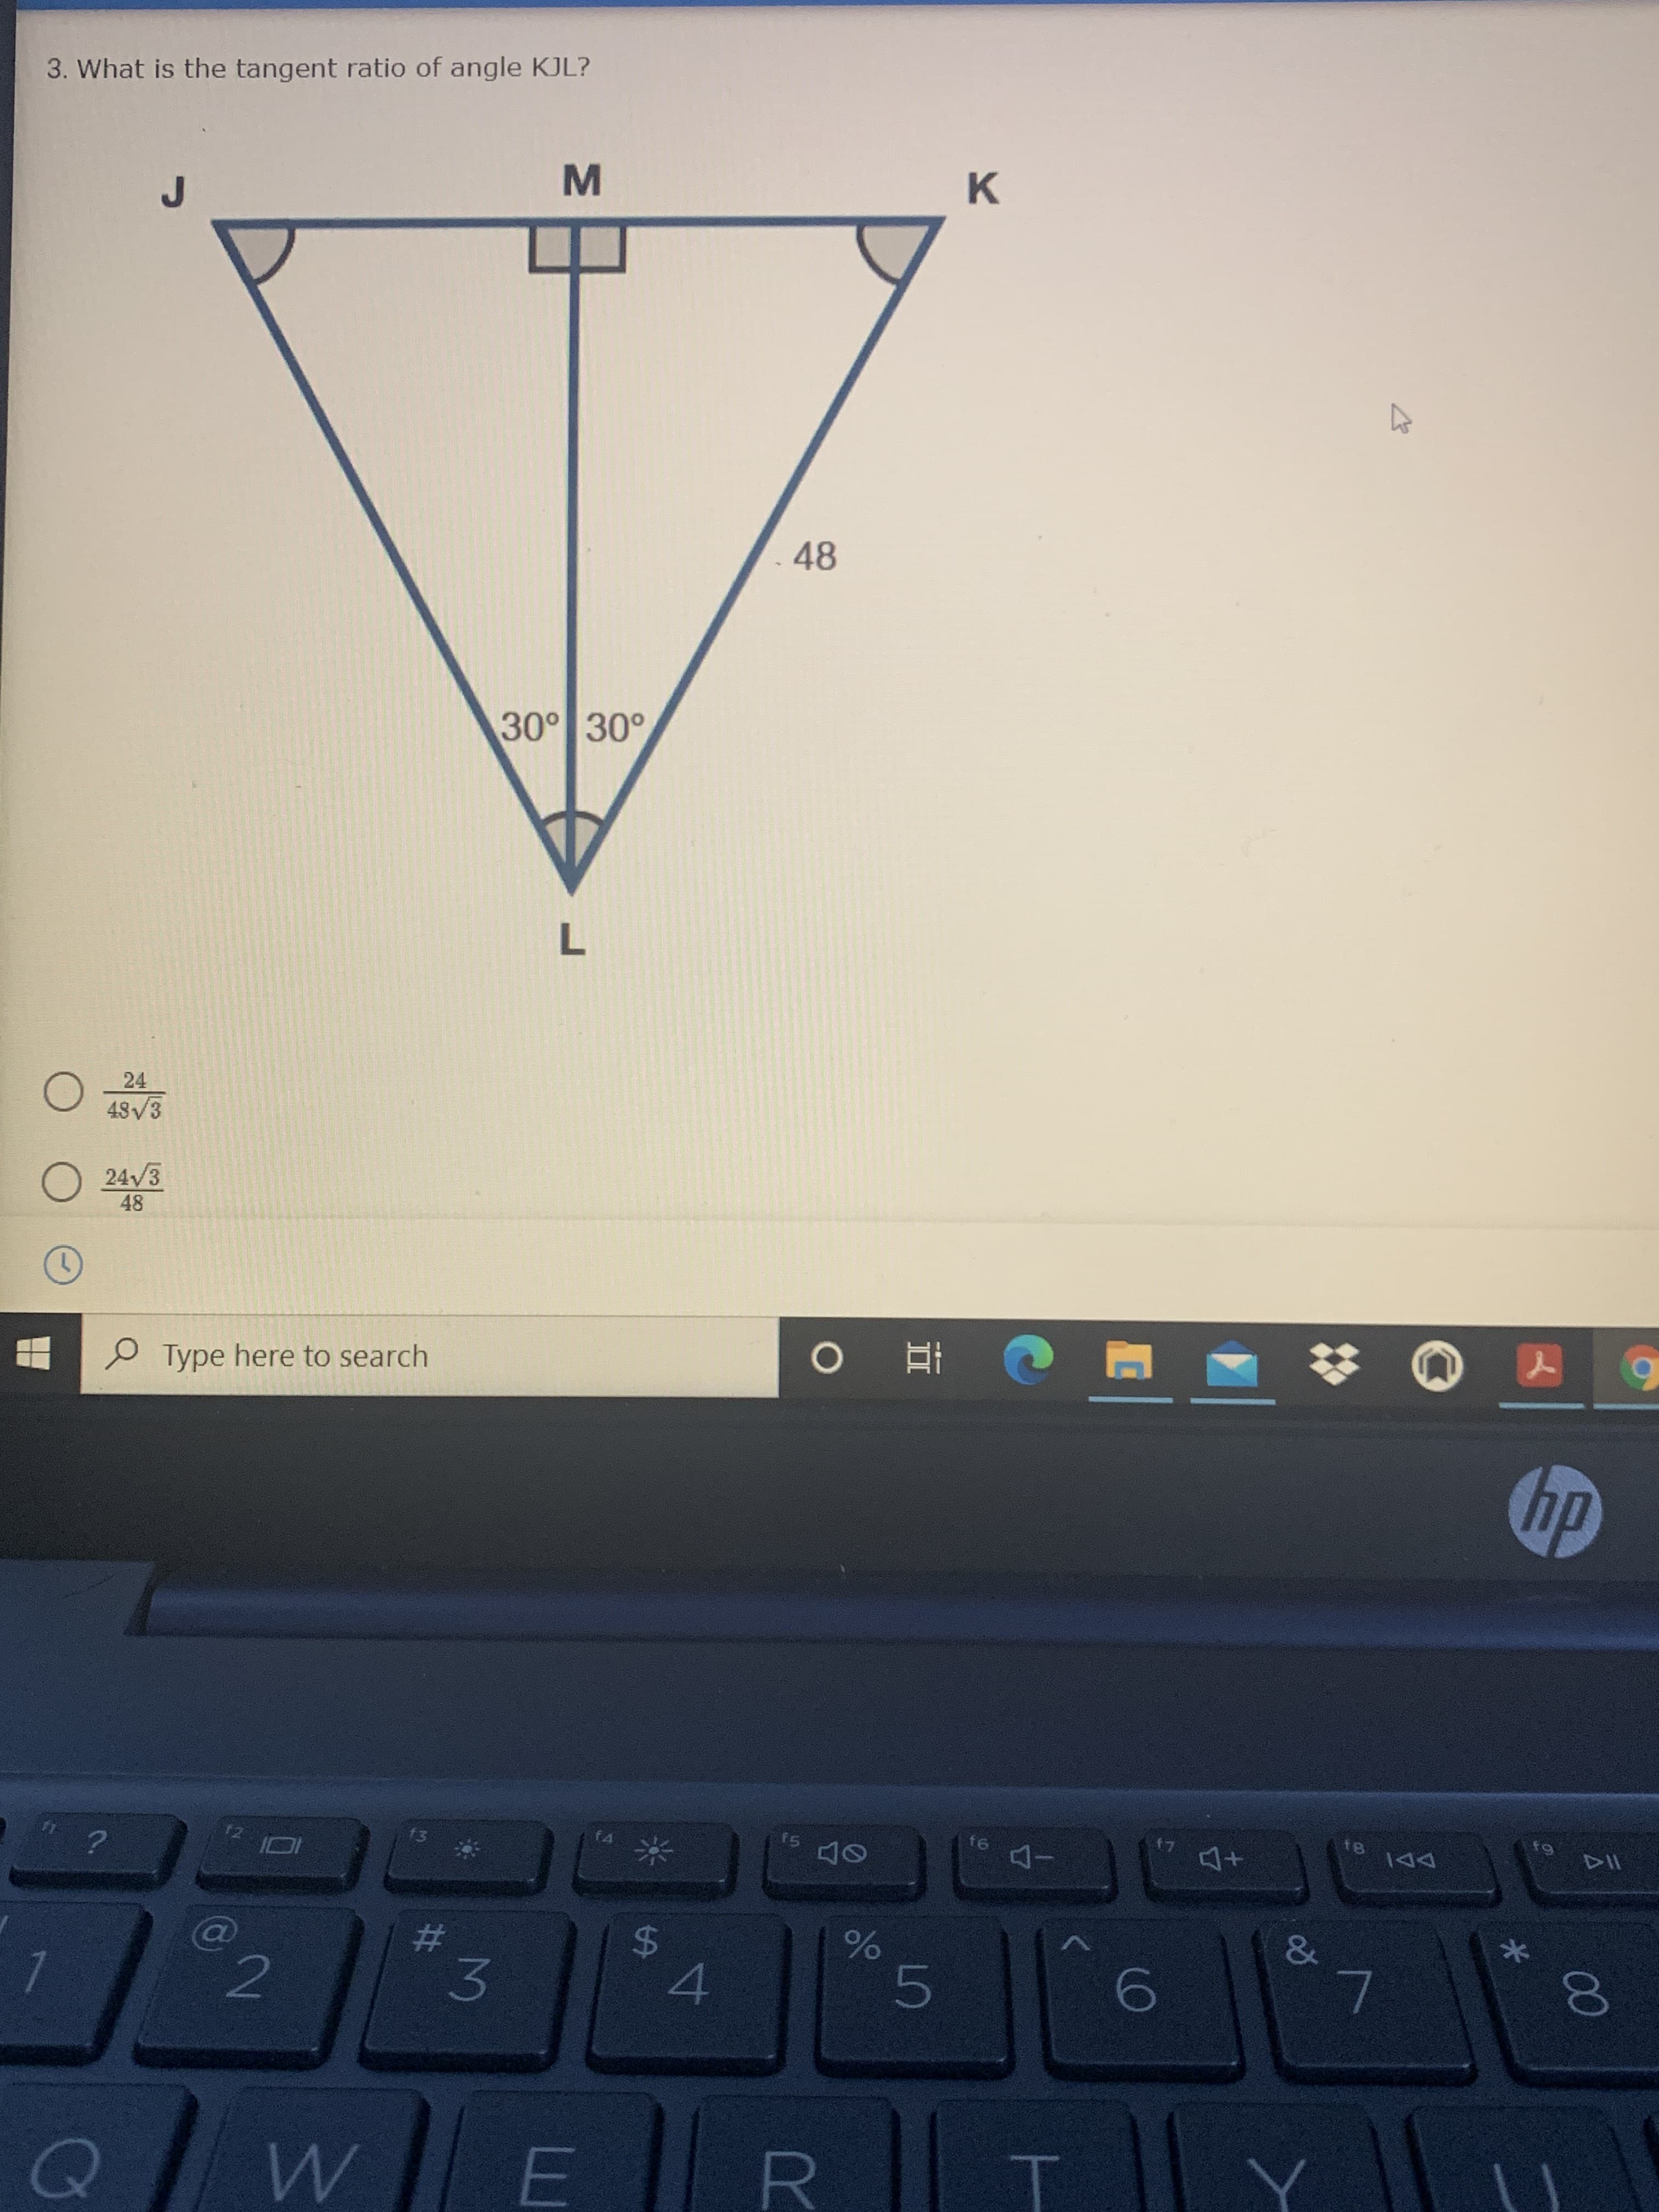 ### Problem Statement
**Question 3: What is the tangent ratio of angle KJL?**

### Diagram Description
The diagram depicts an isosceles triangle \(JKL\) with \(J\) and \(K\) as the endpoints of the equal sides, and \(L\) as the opposite vertex. The triangle is divided into two right triangles by line \(ML\), where \(M\) is the midpoint of \(JK\). 

- \( \angle JLM = 30^\circ\)
- \( \angle KLM = 30^\circ\)
- The length \(JK = 48\)
- \(ML\) is perpendicular to \(JK\), hence \( \angle JML\) and \( \angle KML\) are right angles (\(90^\circ\)).

### Answer Choices
1. \( \frac{24}{48} \)
2. \( \frac{48 \sqrt{3}}{48} \)
3. \( \frac{24 \sqrt{3}}{48} \)

### Explanation
To solve for the tangent of \( \angle KJL\):

1. Identify the right triangle, \( \triangle JML\).
2. Use \( \angle JLM = 30^\circ \) to find \( \tan(30^\circ) \).
3. Apply the formula \( \tan(\theta) = \frac{\text{opposite}}{\text{adjacent}} \) where \( \theta=30^\circ \).

For \( \angle JLM = 30^\circ \):
- Opposite side to \( \angle JLM \): \( ML \)
- Adjacent side to \( \angle JLM \): \( JM \)

Since \(JK = 48\) and \(M\) is the midpoint (\( JM = MK = \frac{48}{2} = 24\)):
- Tangent of \(30^\circ\) is \( \frac{ML}{JM} = \frac{ML}{24} \)
- Note that \( ML = 24 \times \tan(30^\circ)\)

Given that \( \tan(30^\circ) = \frac{1}{\sqrt{3}} \), we can simplify:
\[ \tan(\angle JLM) = \frac{24 \times \frac{1}{\sqrt{3}}}{24} = \frac{24